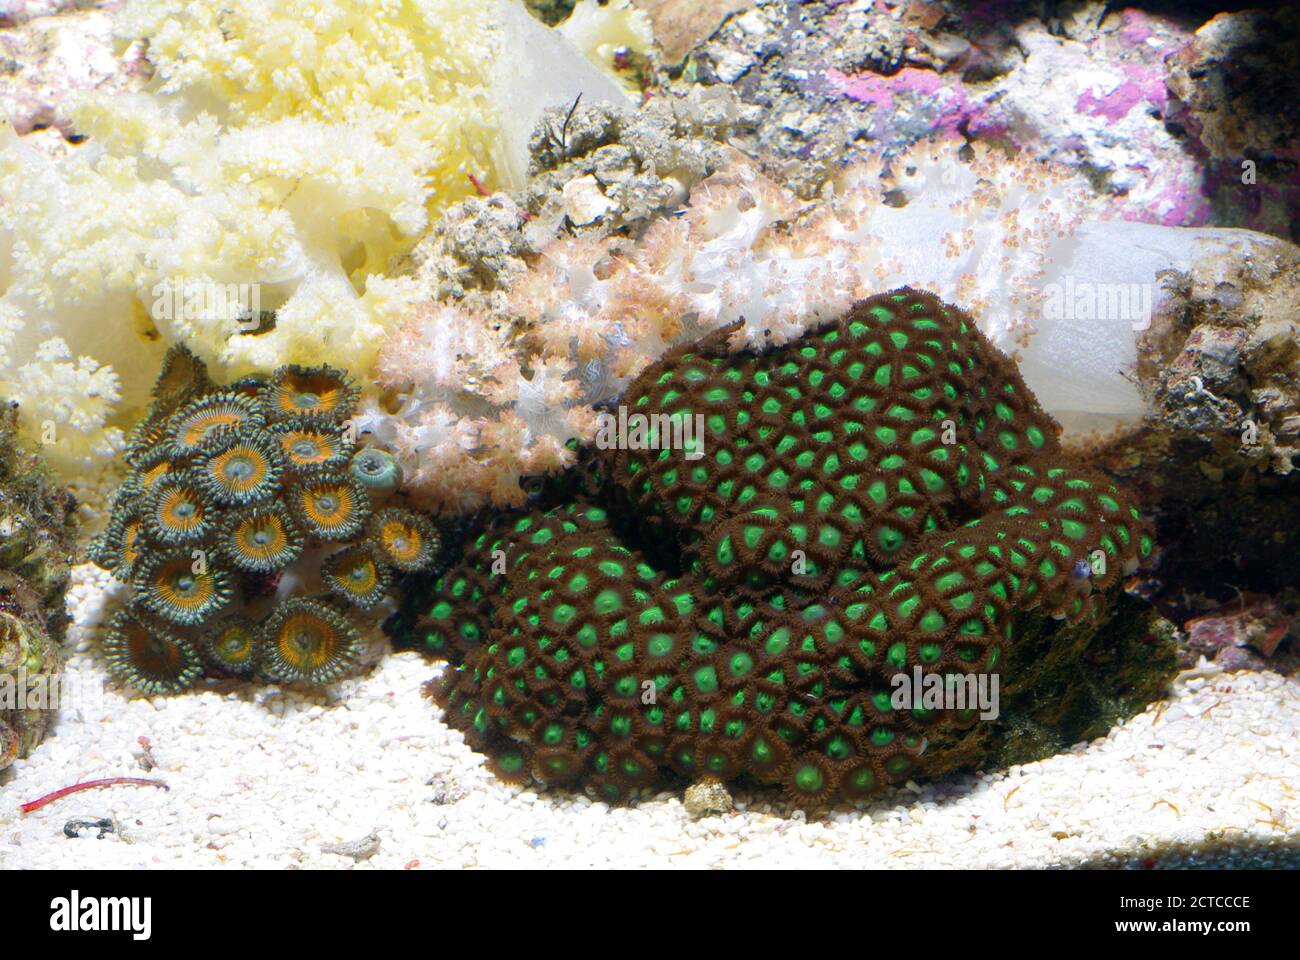 Zoanthid (Palythoa sp. ) and Brain coral (Favia sp.) in aquarium Stock Photo